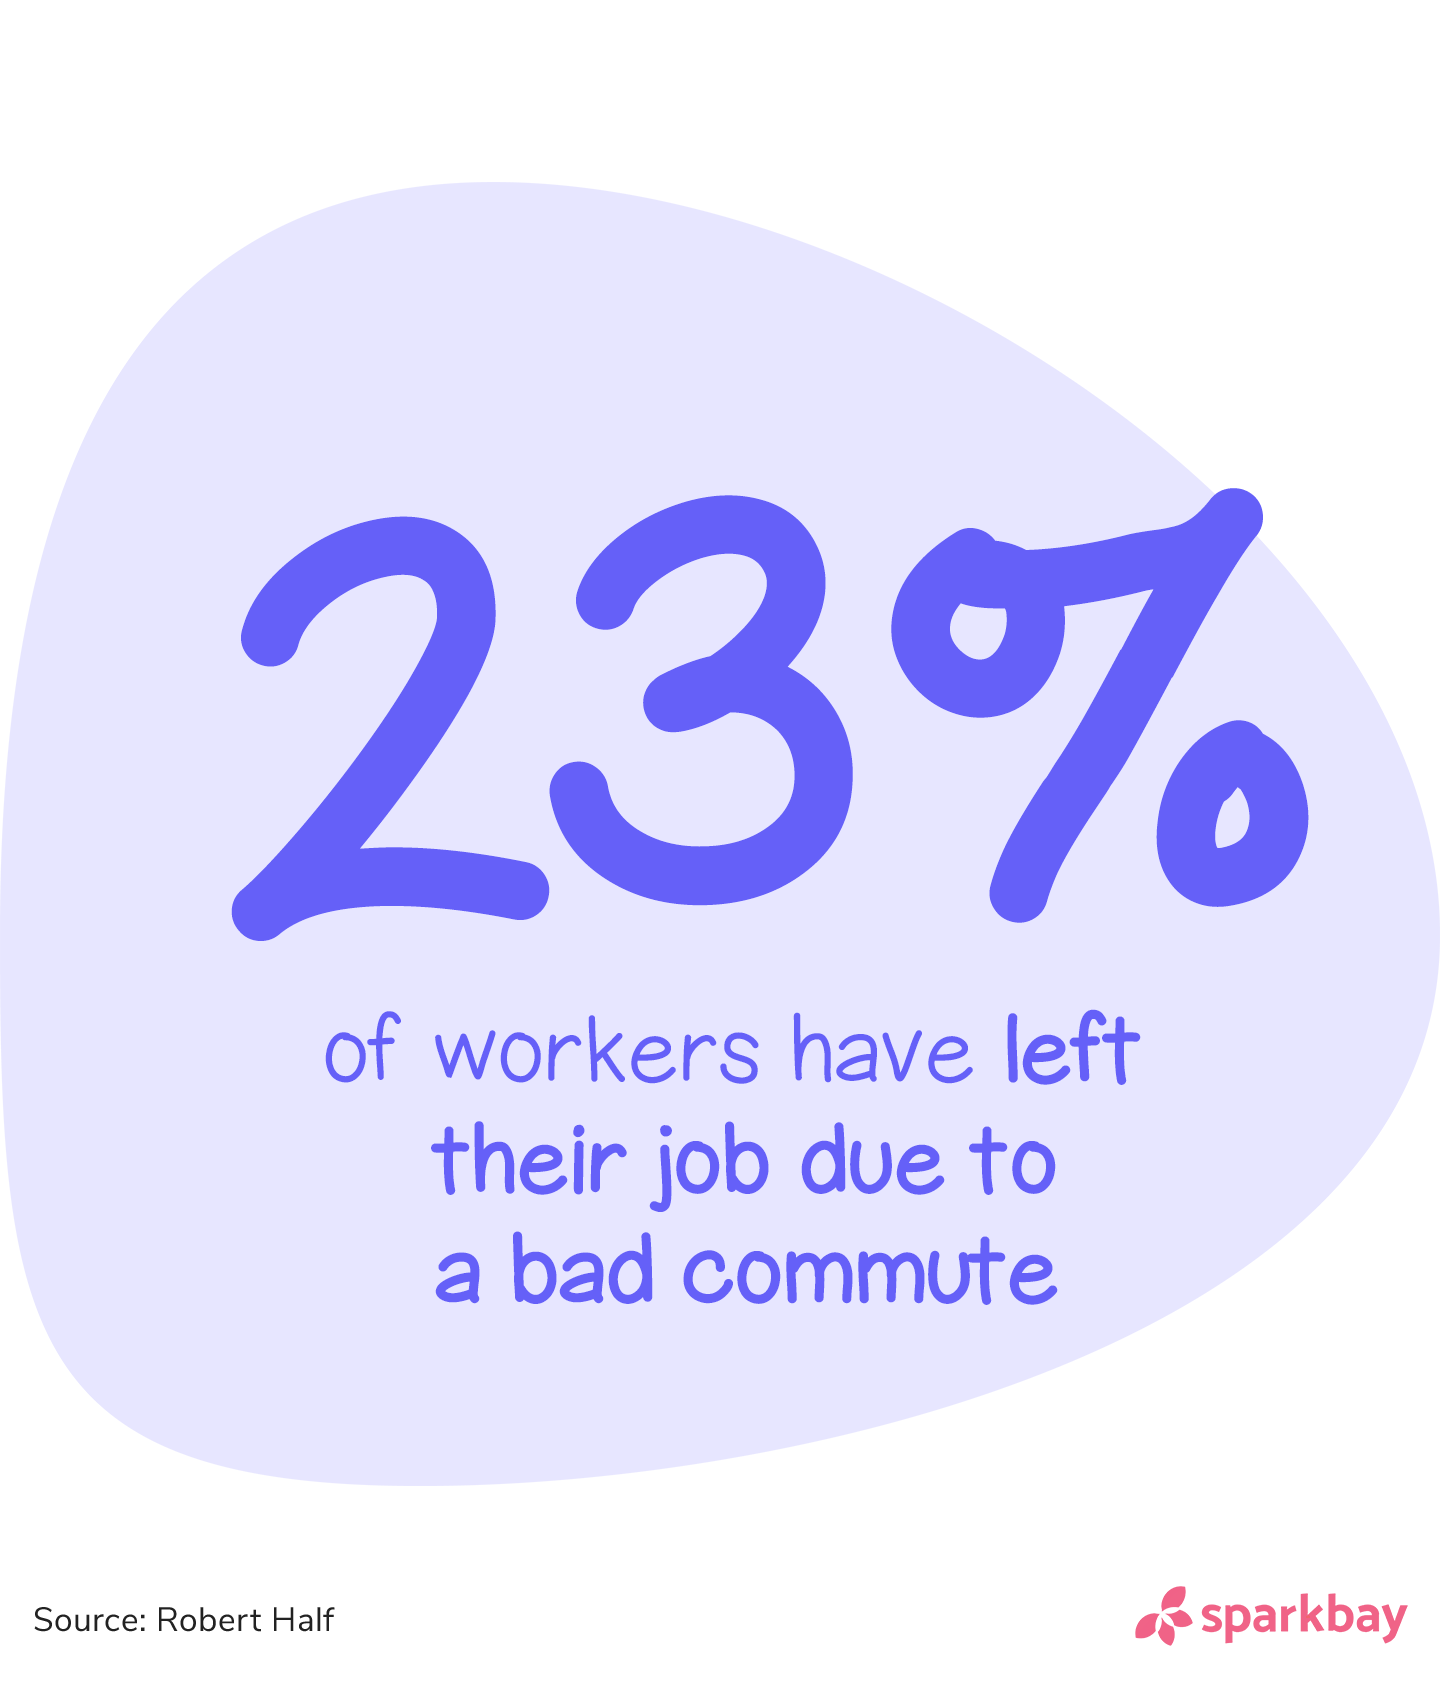 Employee turnover statistics: 23% of workers have left their job due to a bad commute.'